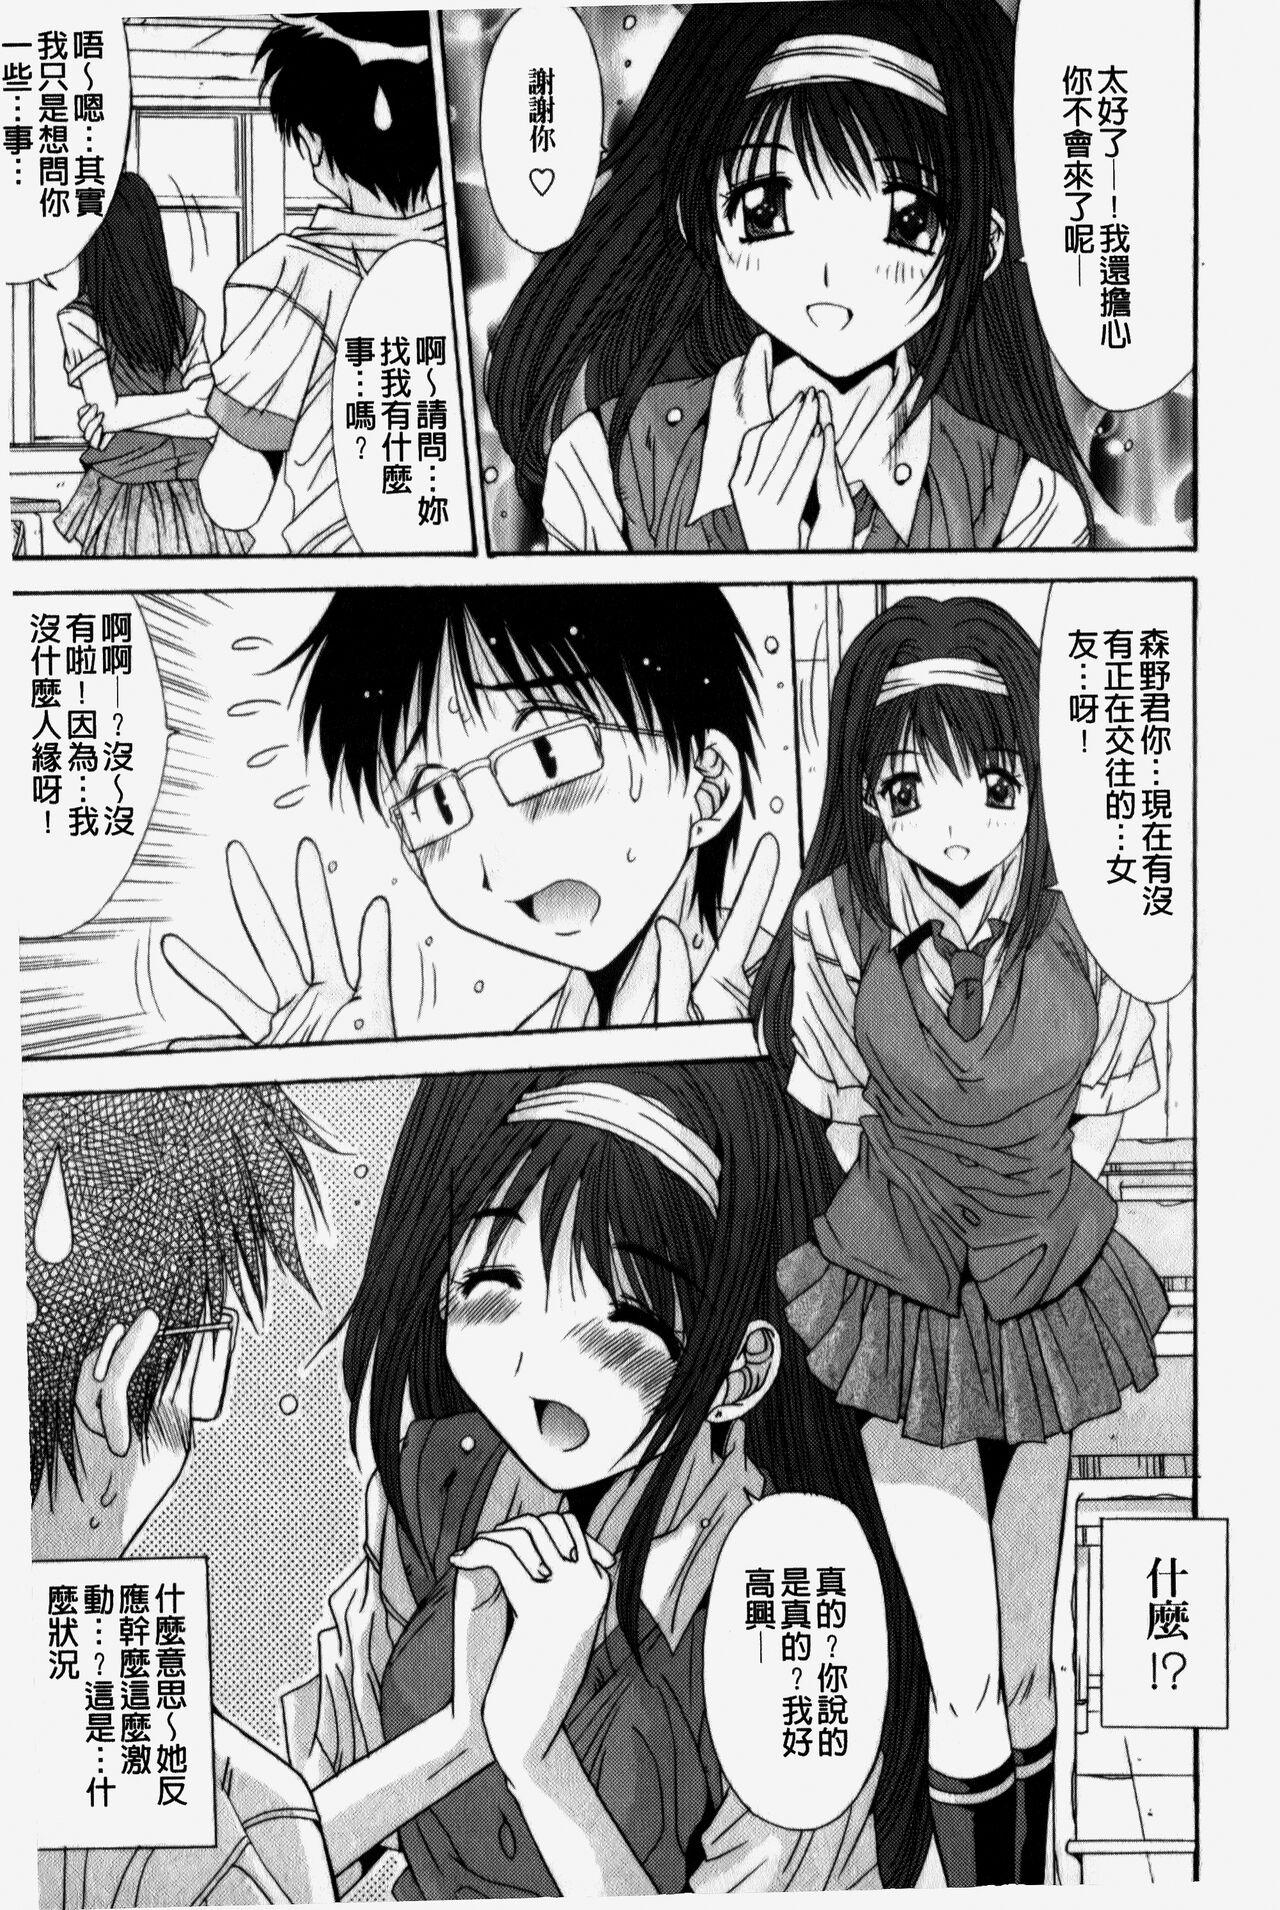 Licking Pussy Kare to Kanojo no Jijou - Boy Meets Girl | 男友與女友之間的情事 Roughsex - Page 10